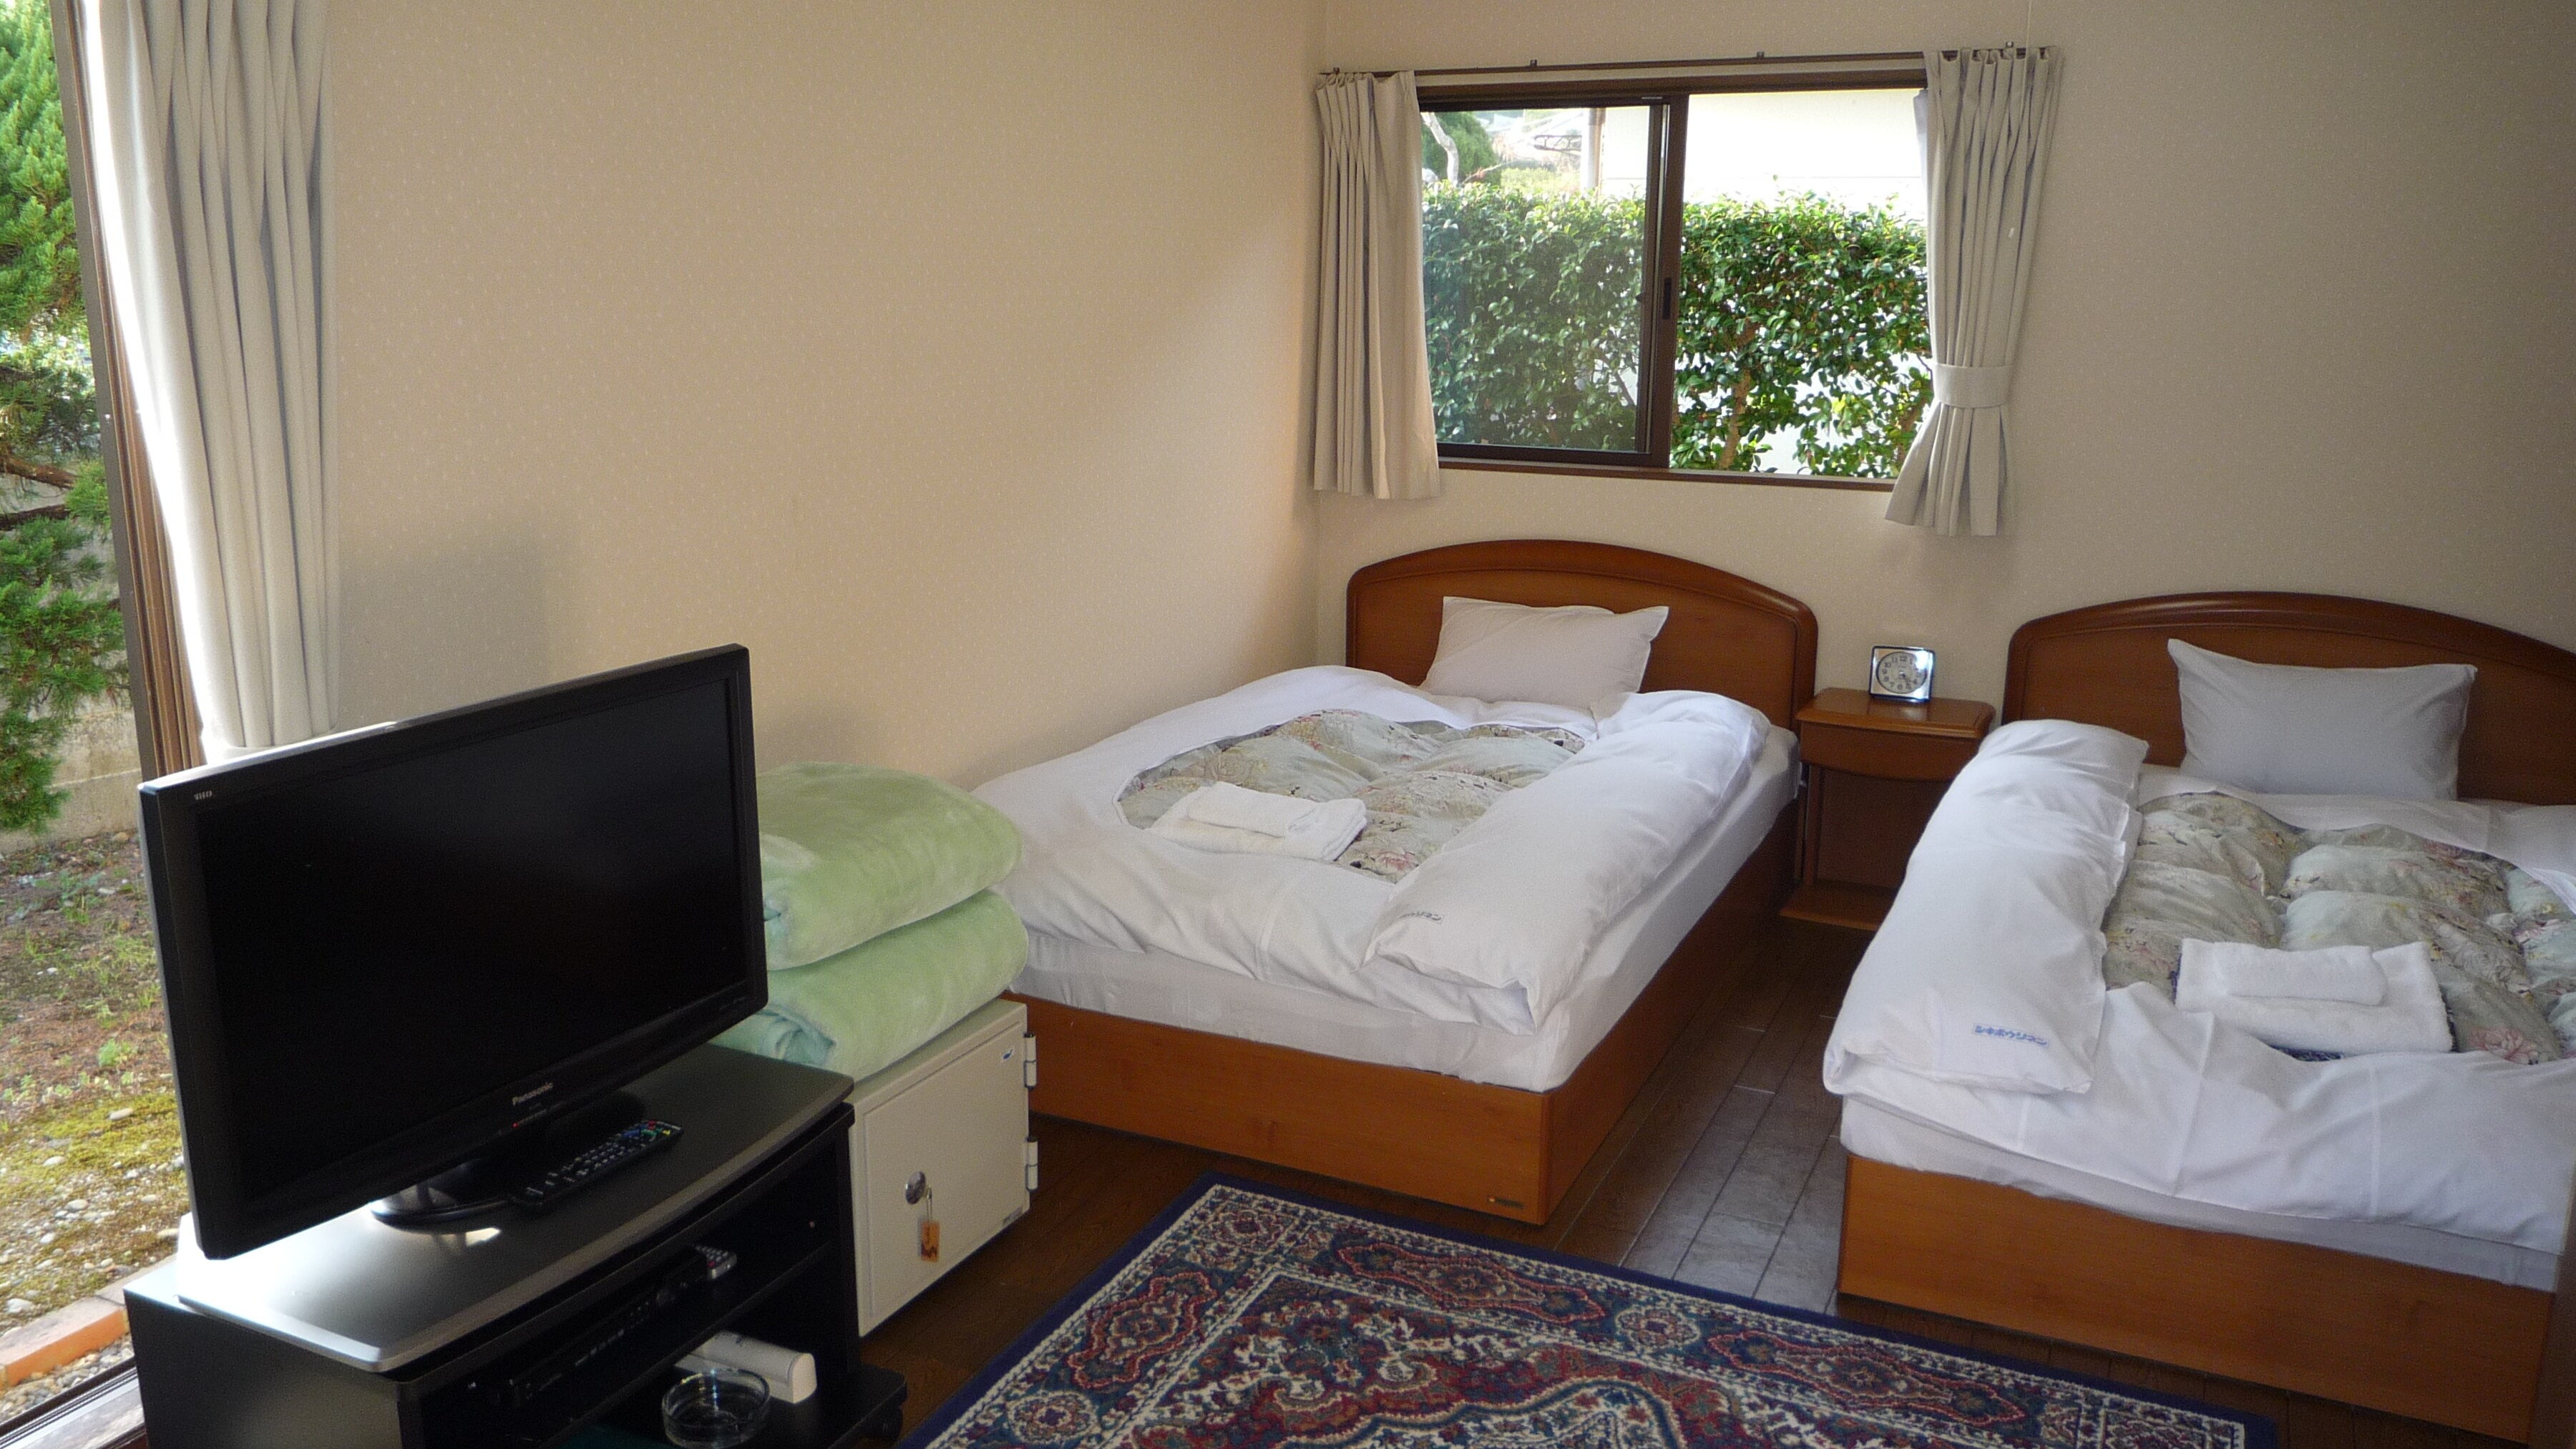 Privately reserved [Western-style twin room] 18 sqm bedroom